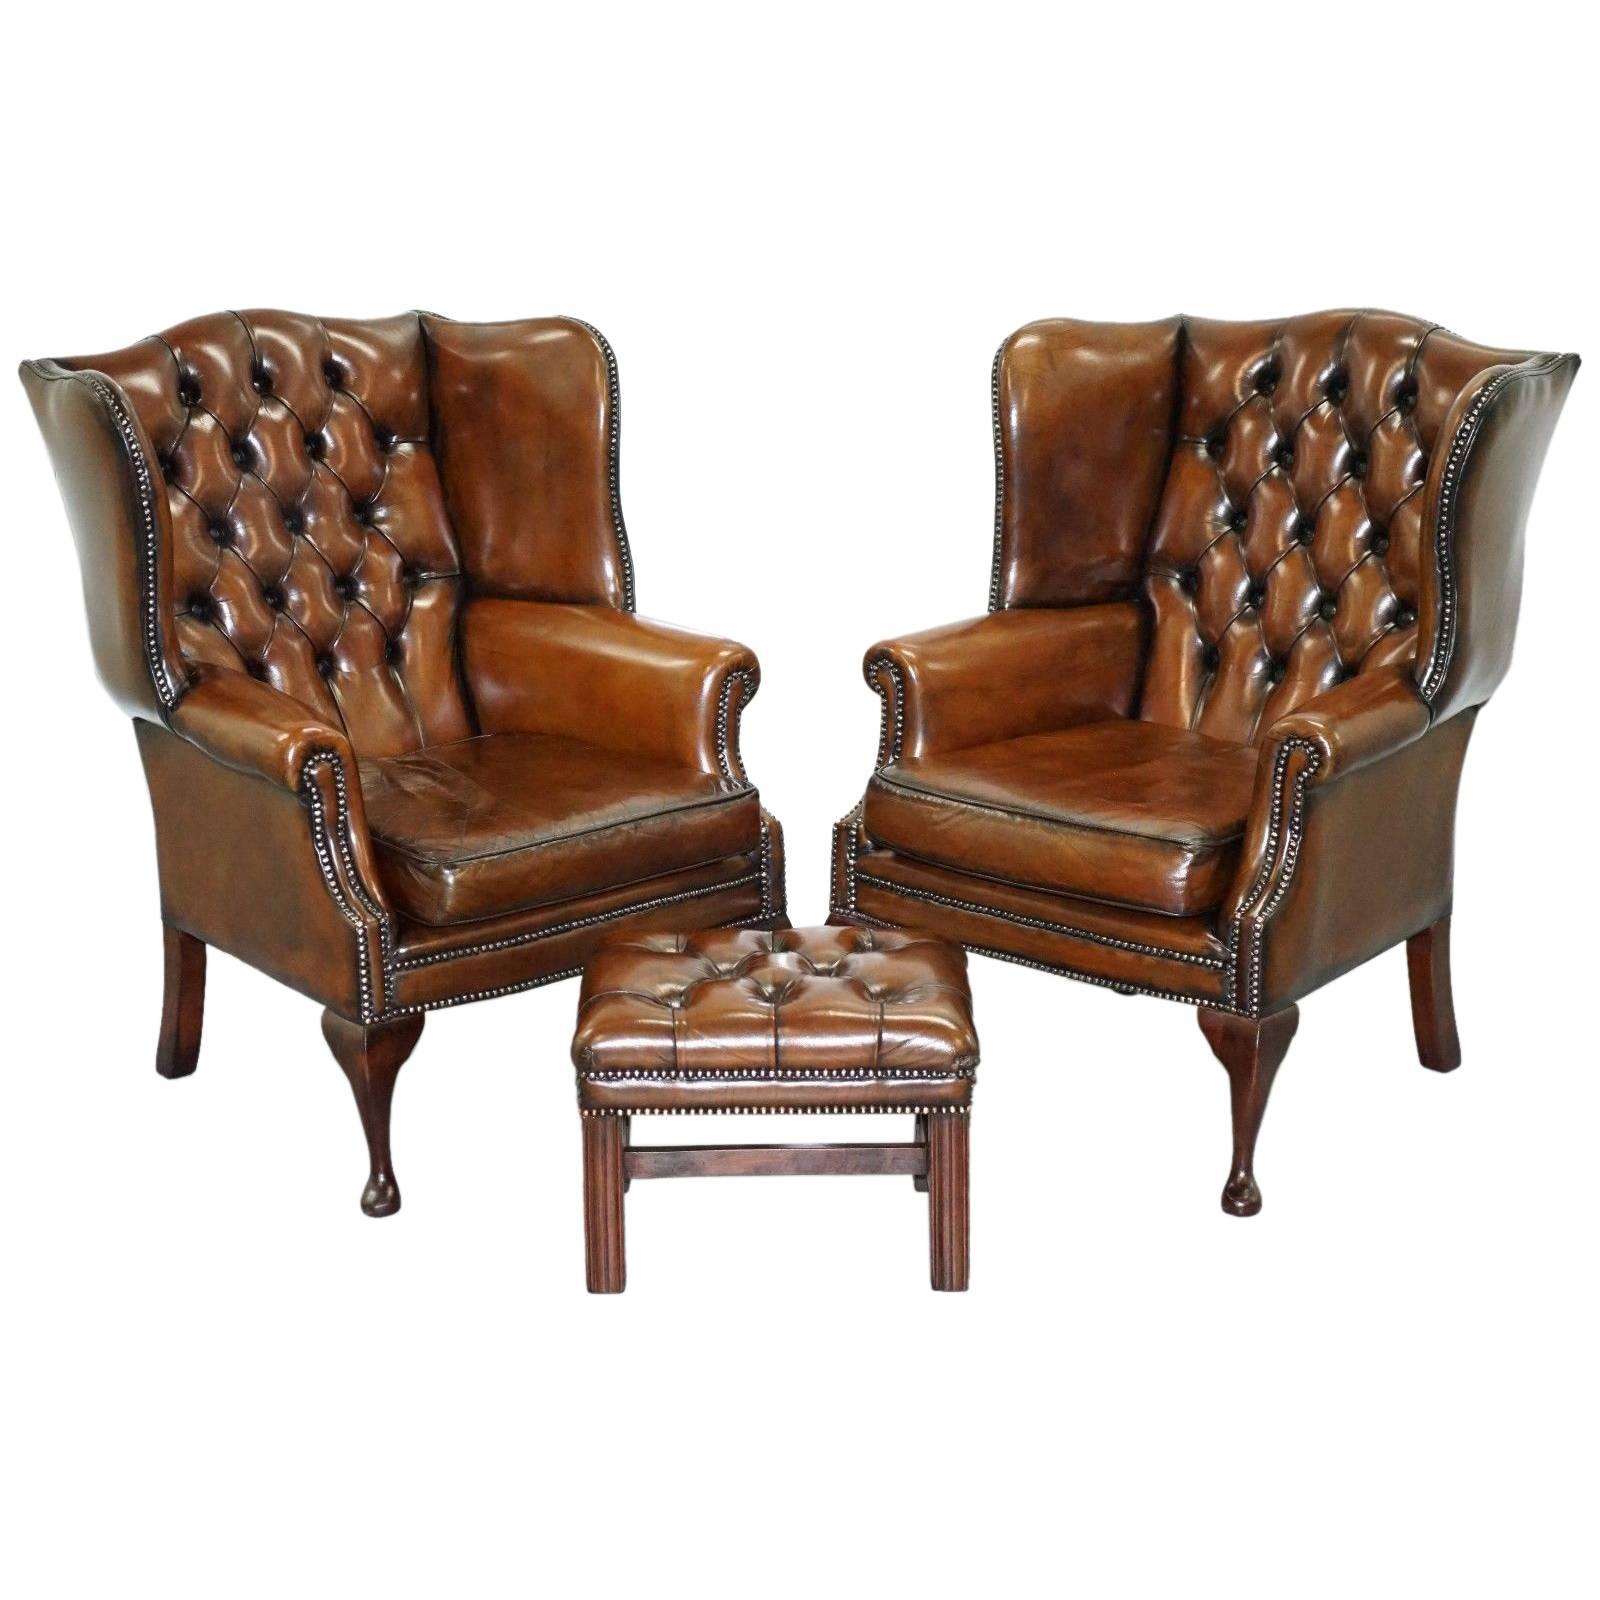 Pair of Hand-Dyed Cigar Brown Leather Chesterfield Wingback Armchairs and Stool